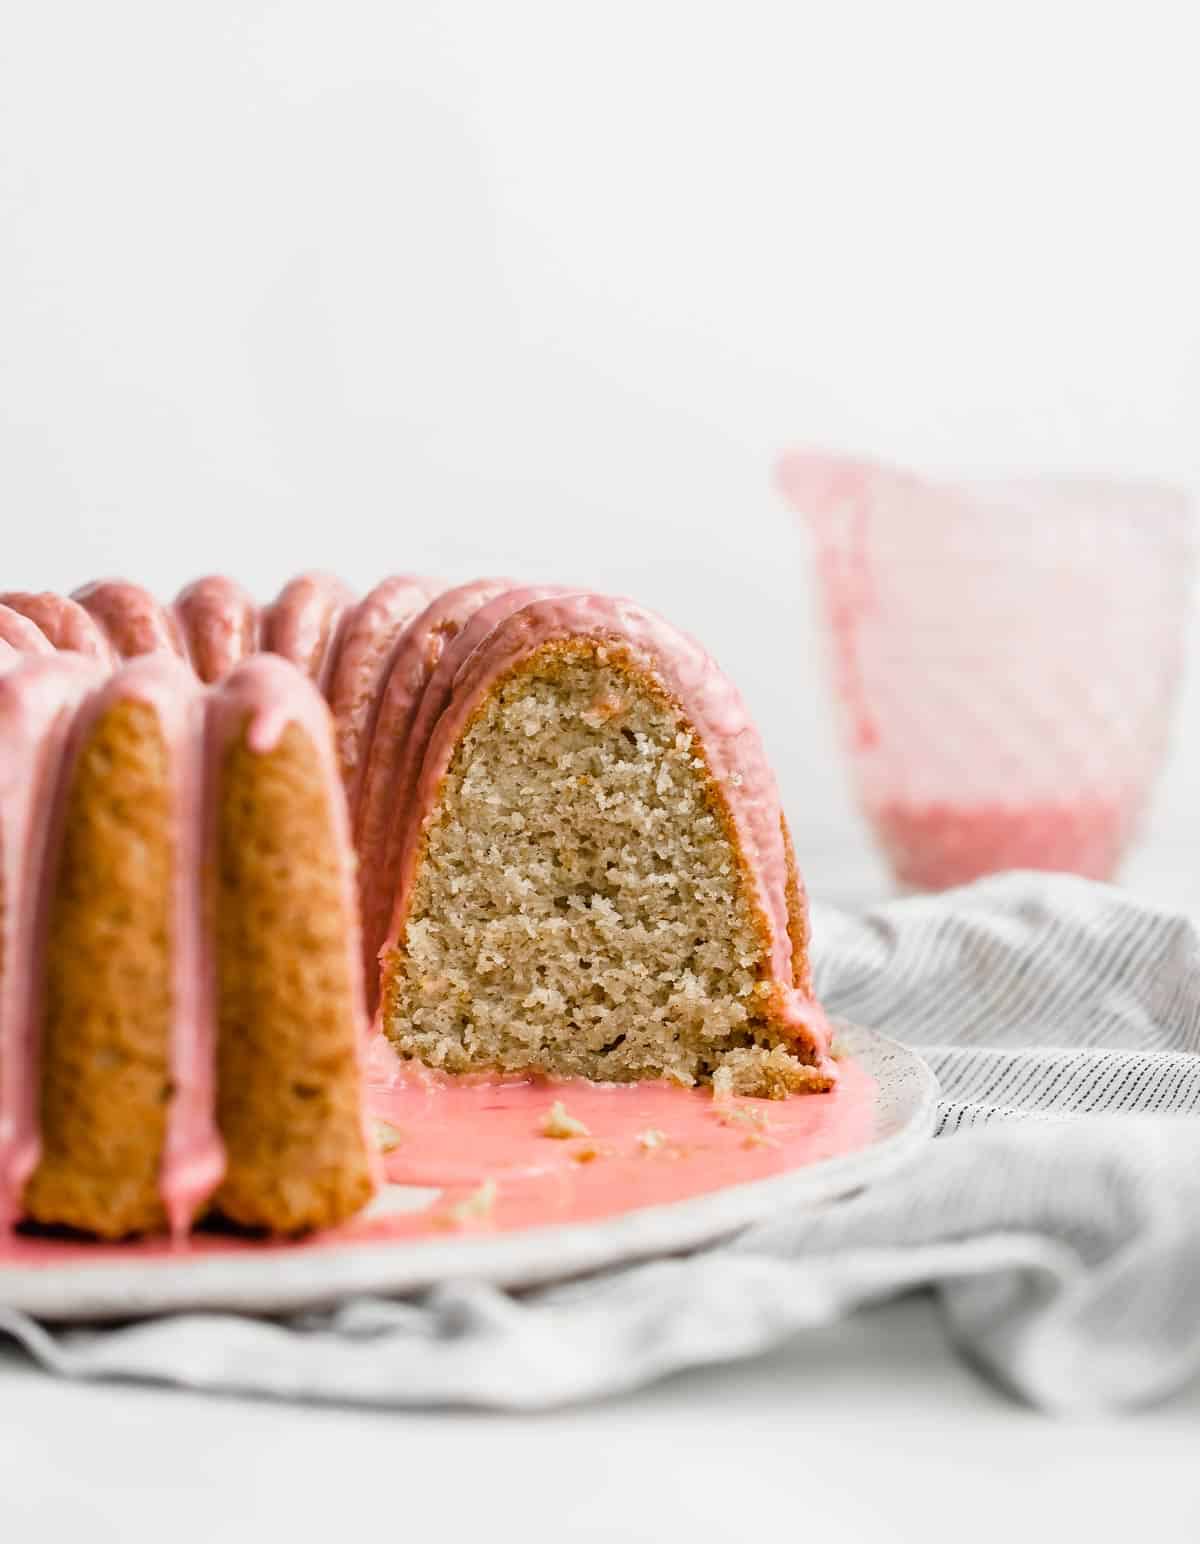 A blood orange bundt cake with cardamom cut, showing the soft interior.